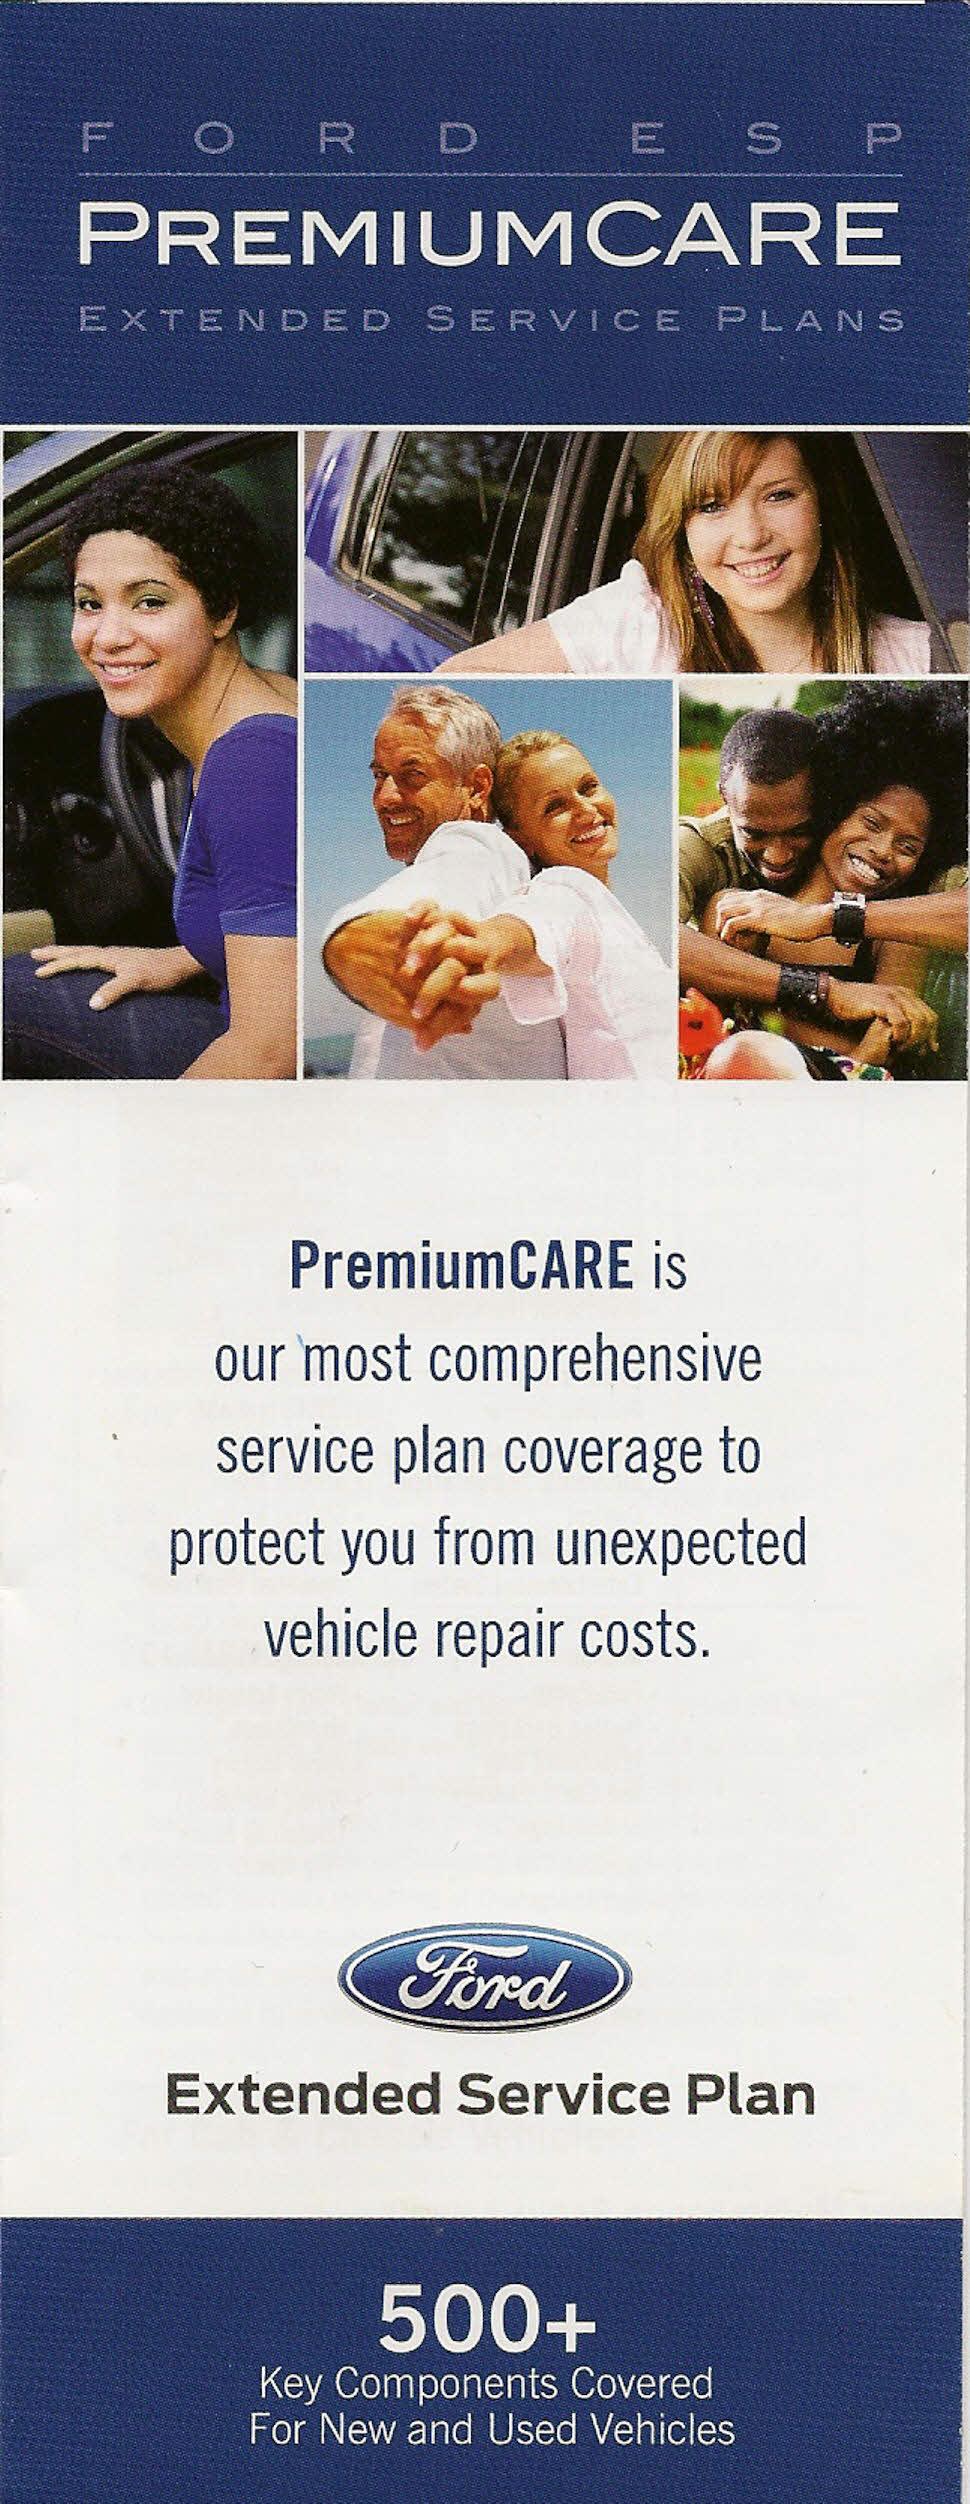 PremiumCARE is our 'most comprehensive service plan coverage to